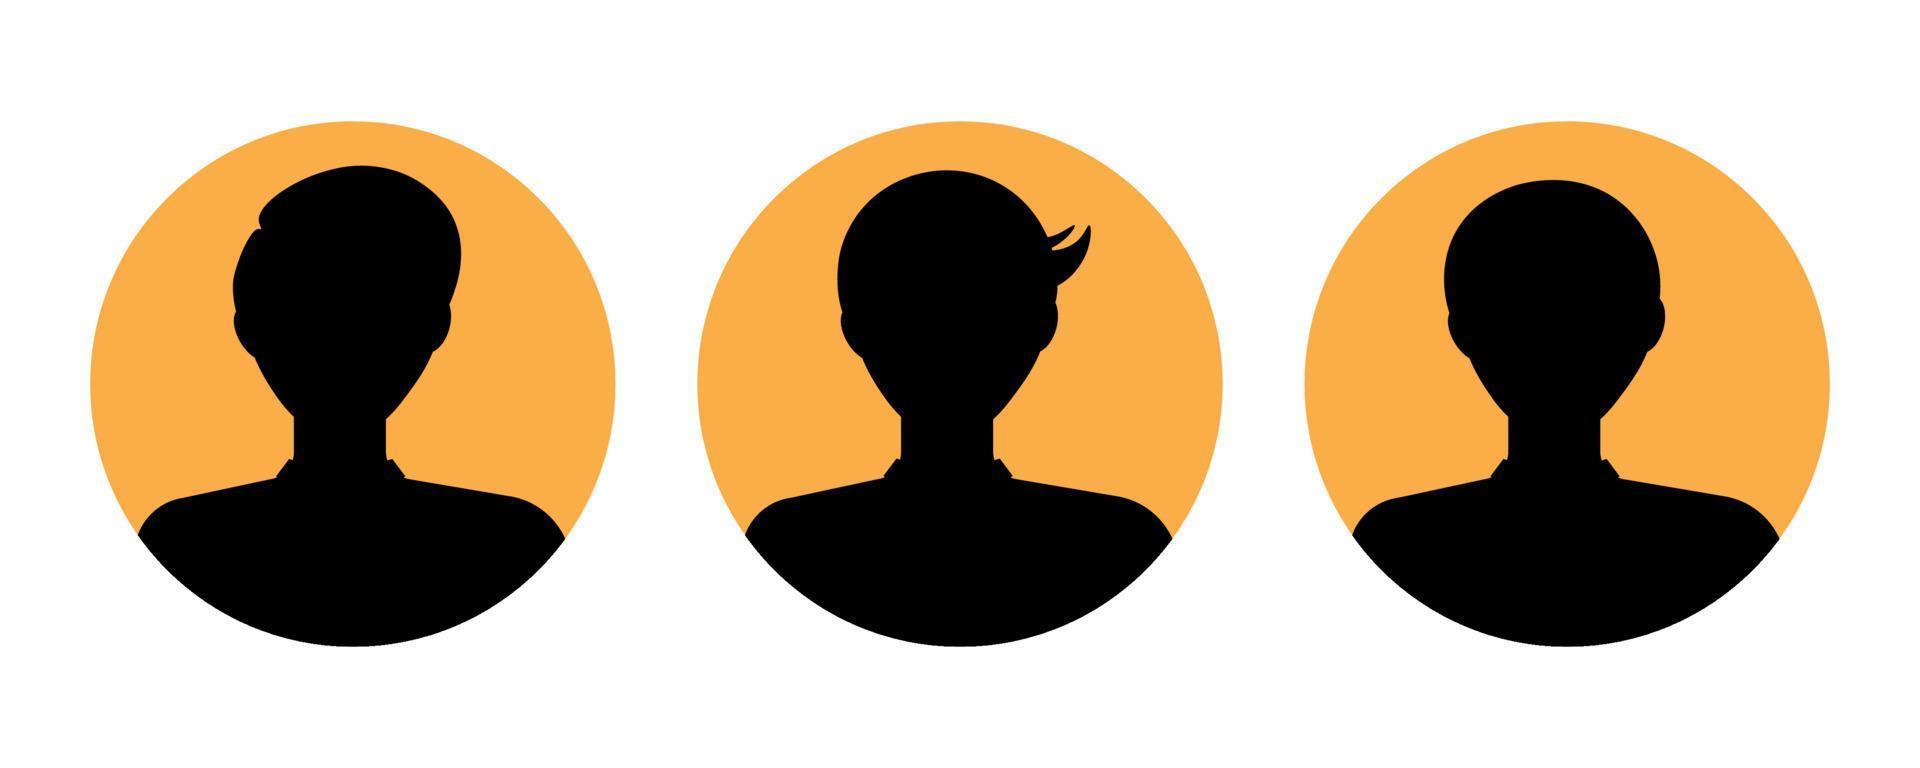 Male character profile icon set vector